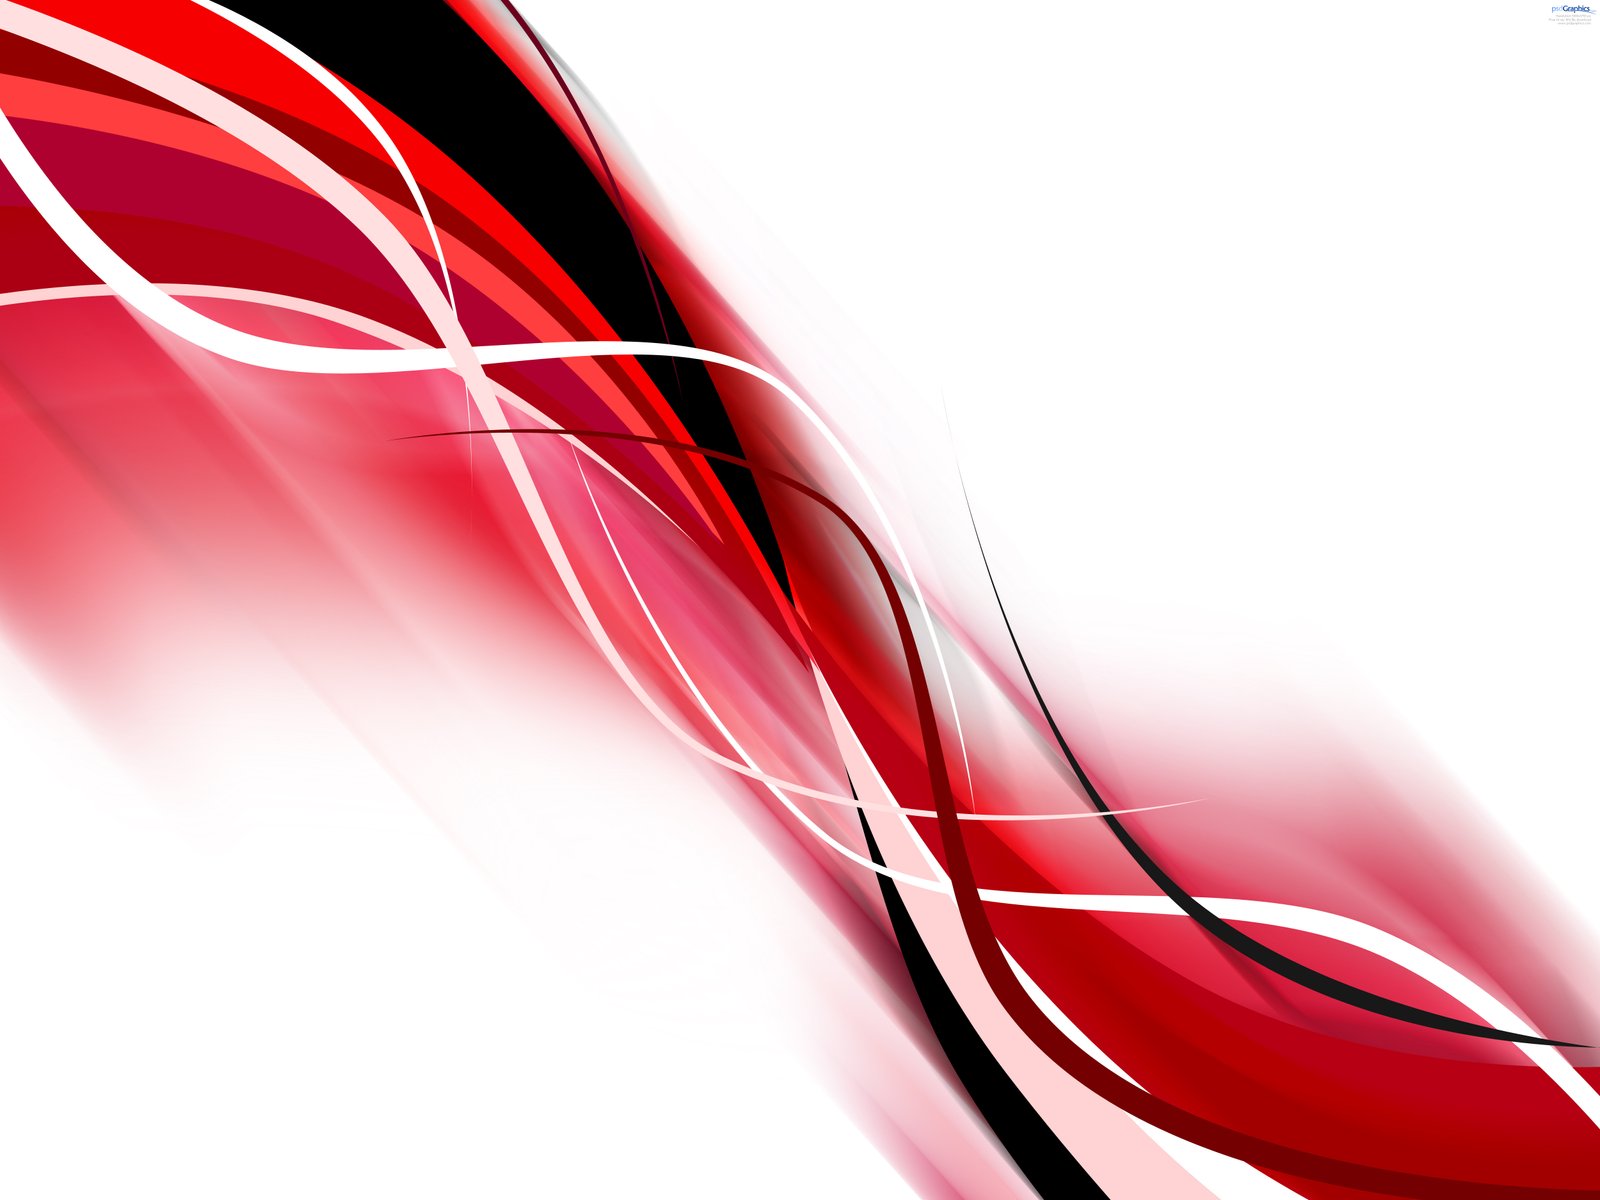 Red and blue abstract waves backgrounds | PSDgraphics